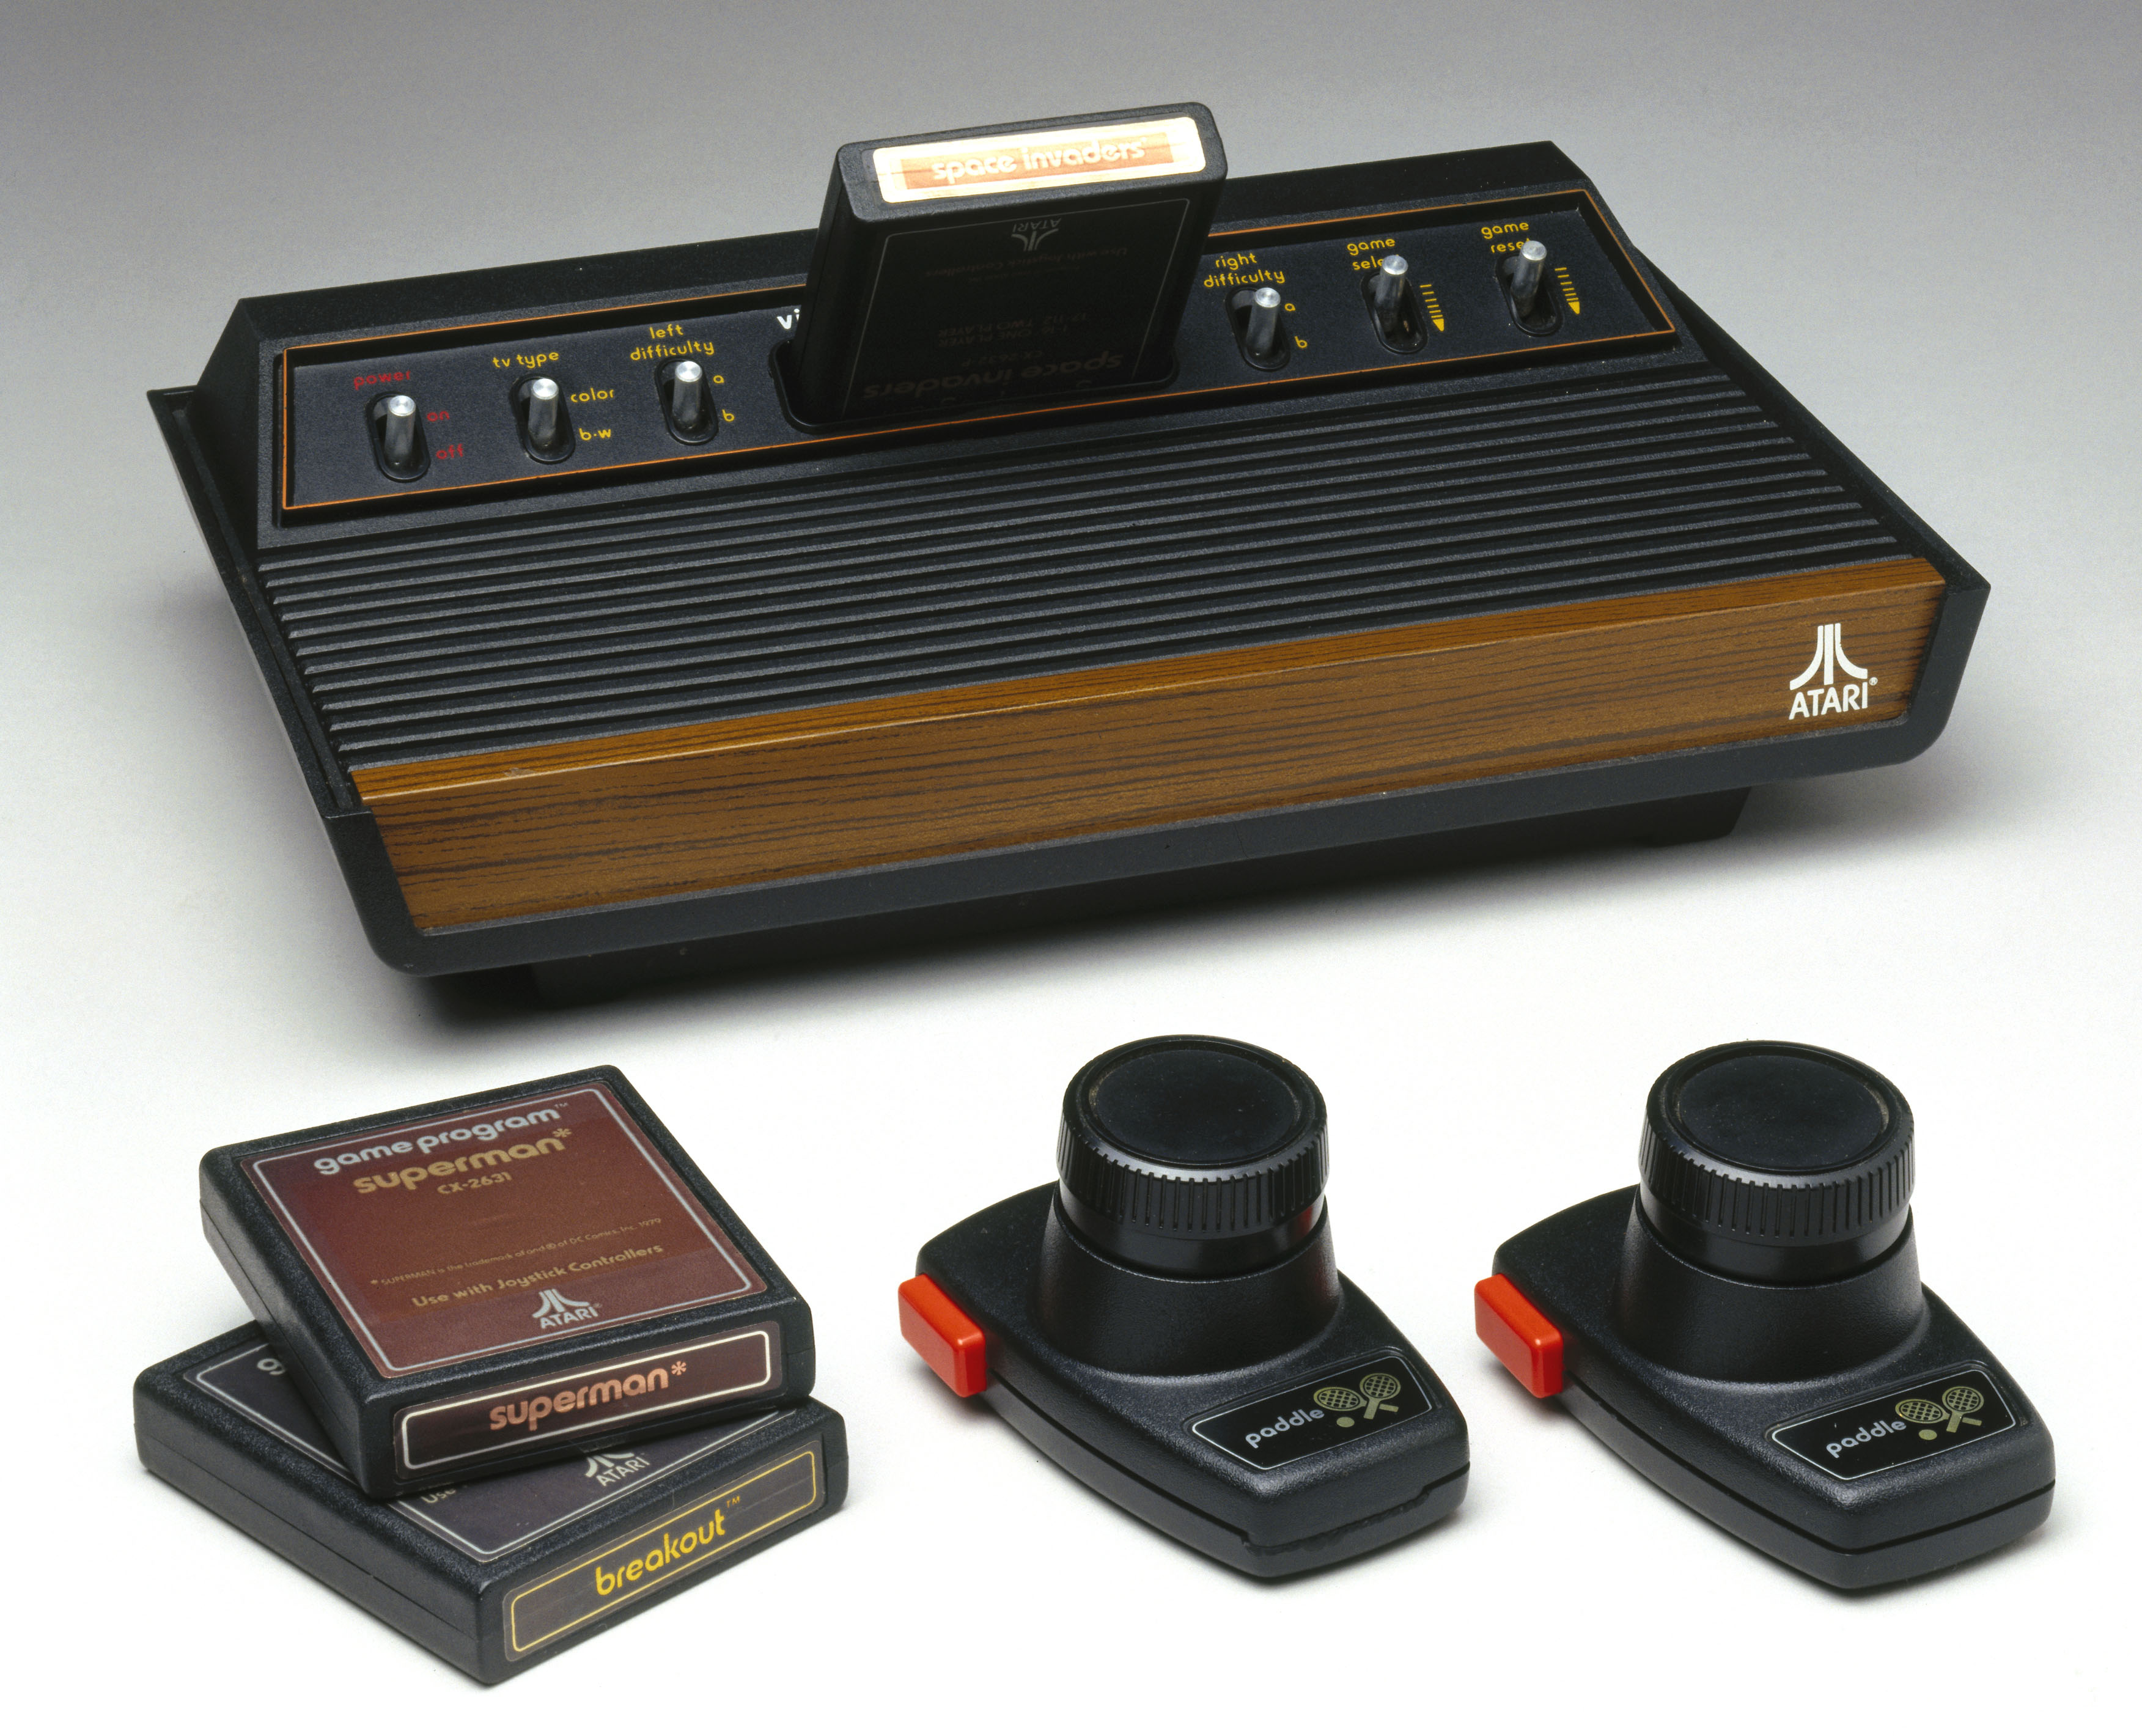 Video game console by Atari